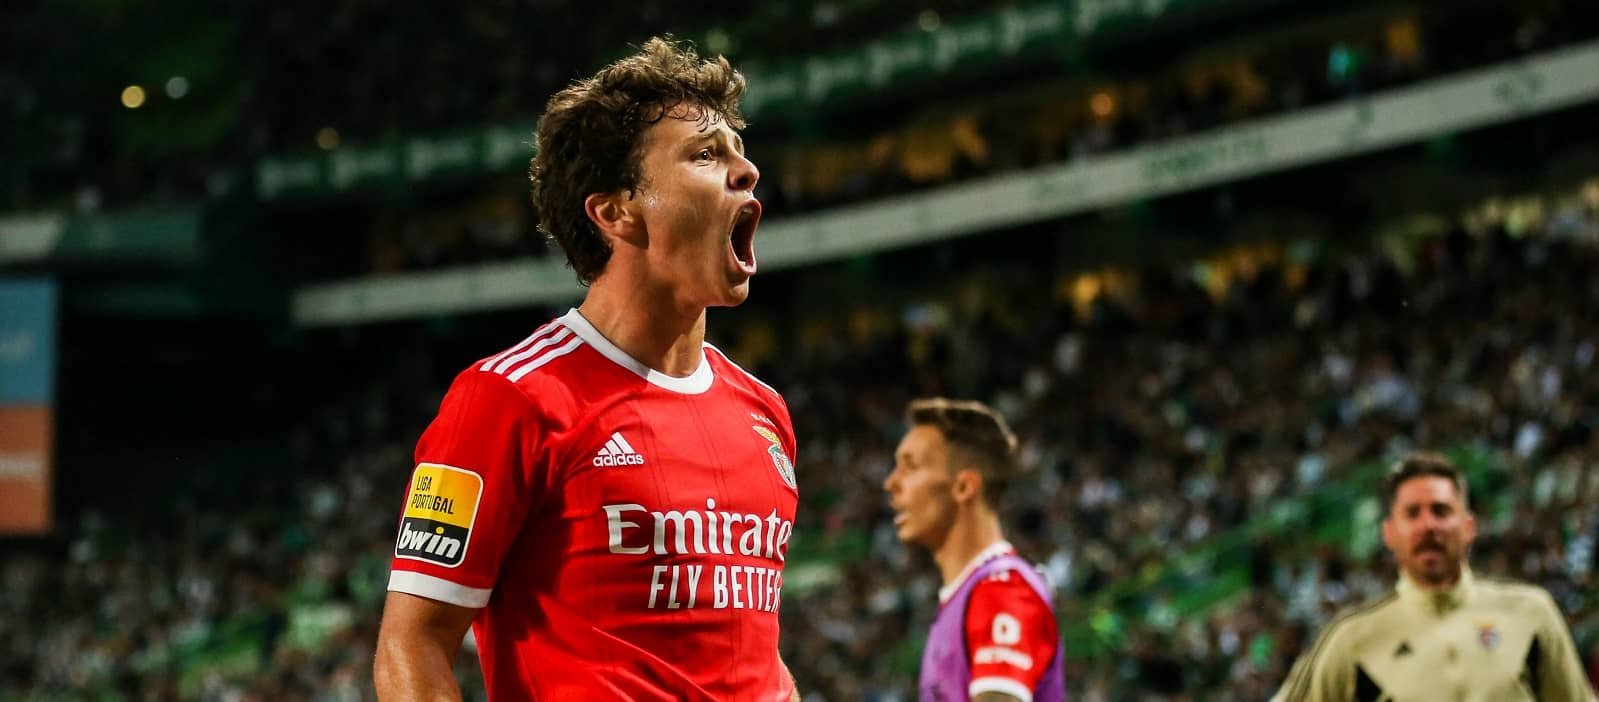 Neves could leave Benfica this summer.